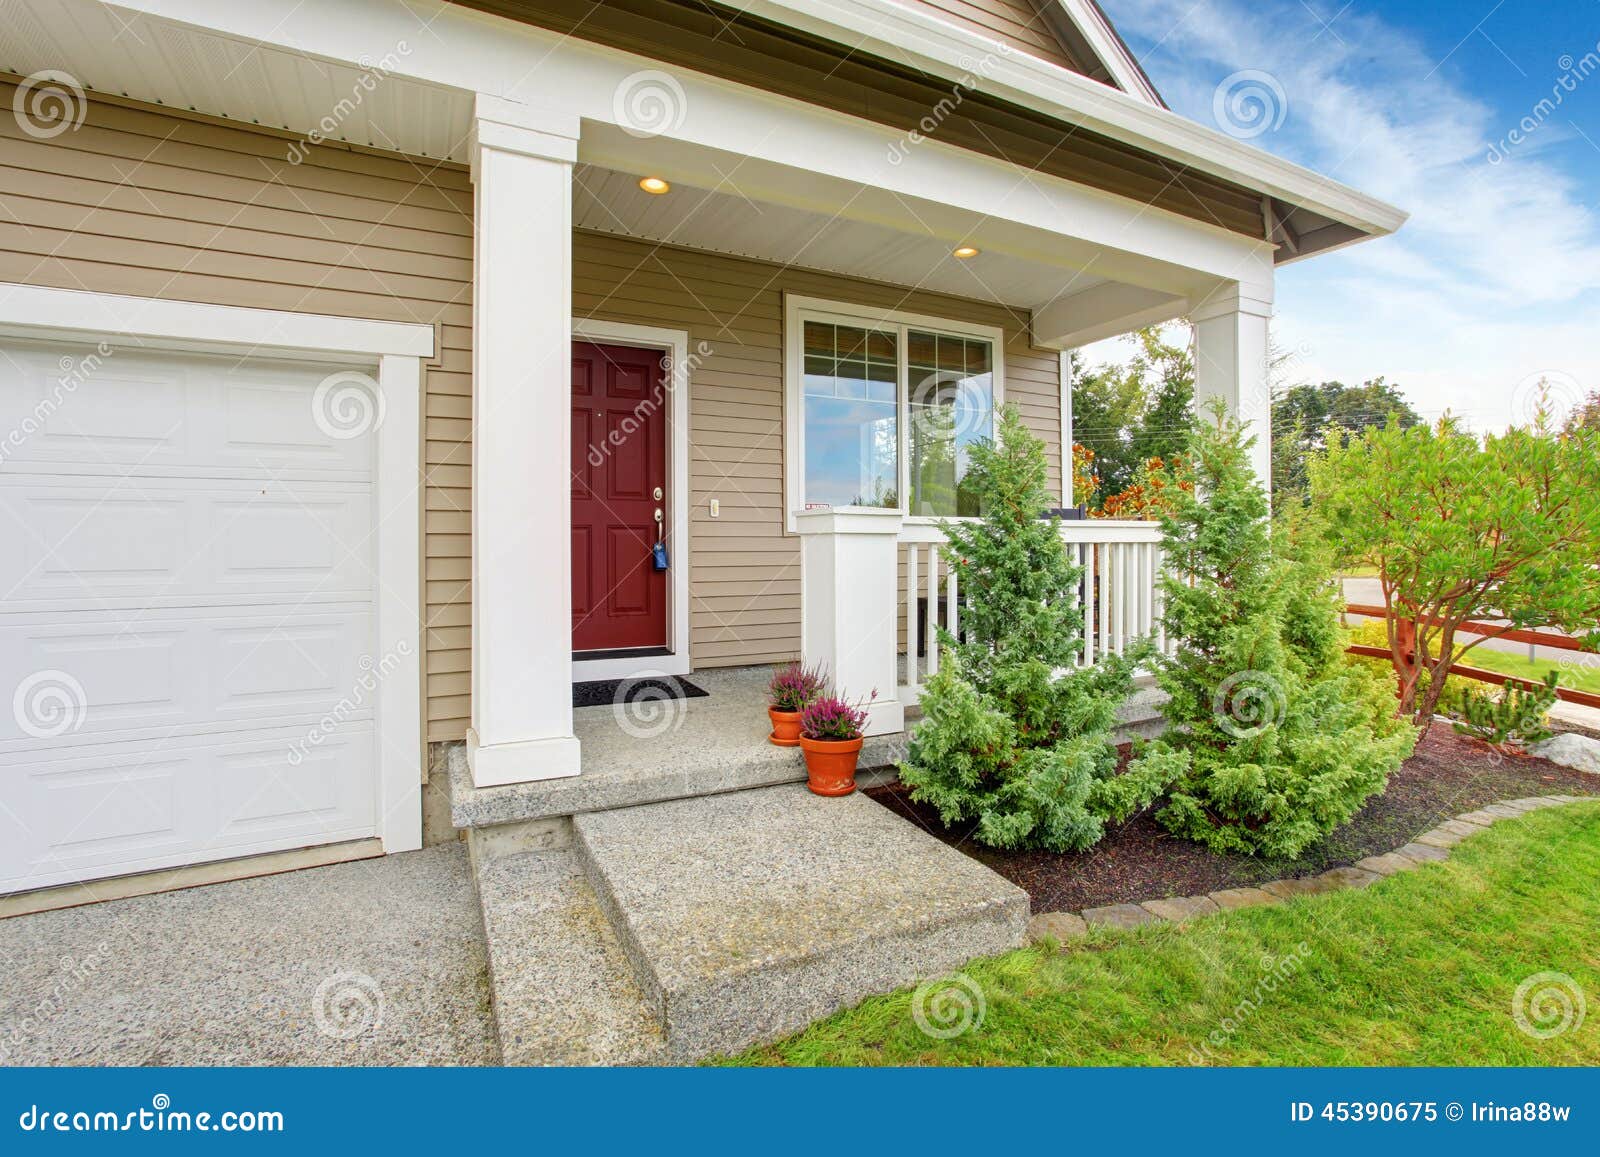 Entrance porch with front yard landscape. Entrance porch with railings and red door. Front yard landscape with decorative fir trees